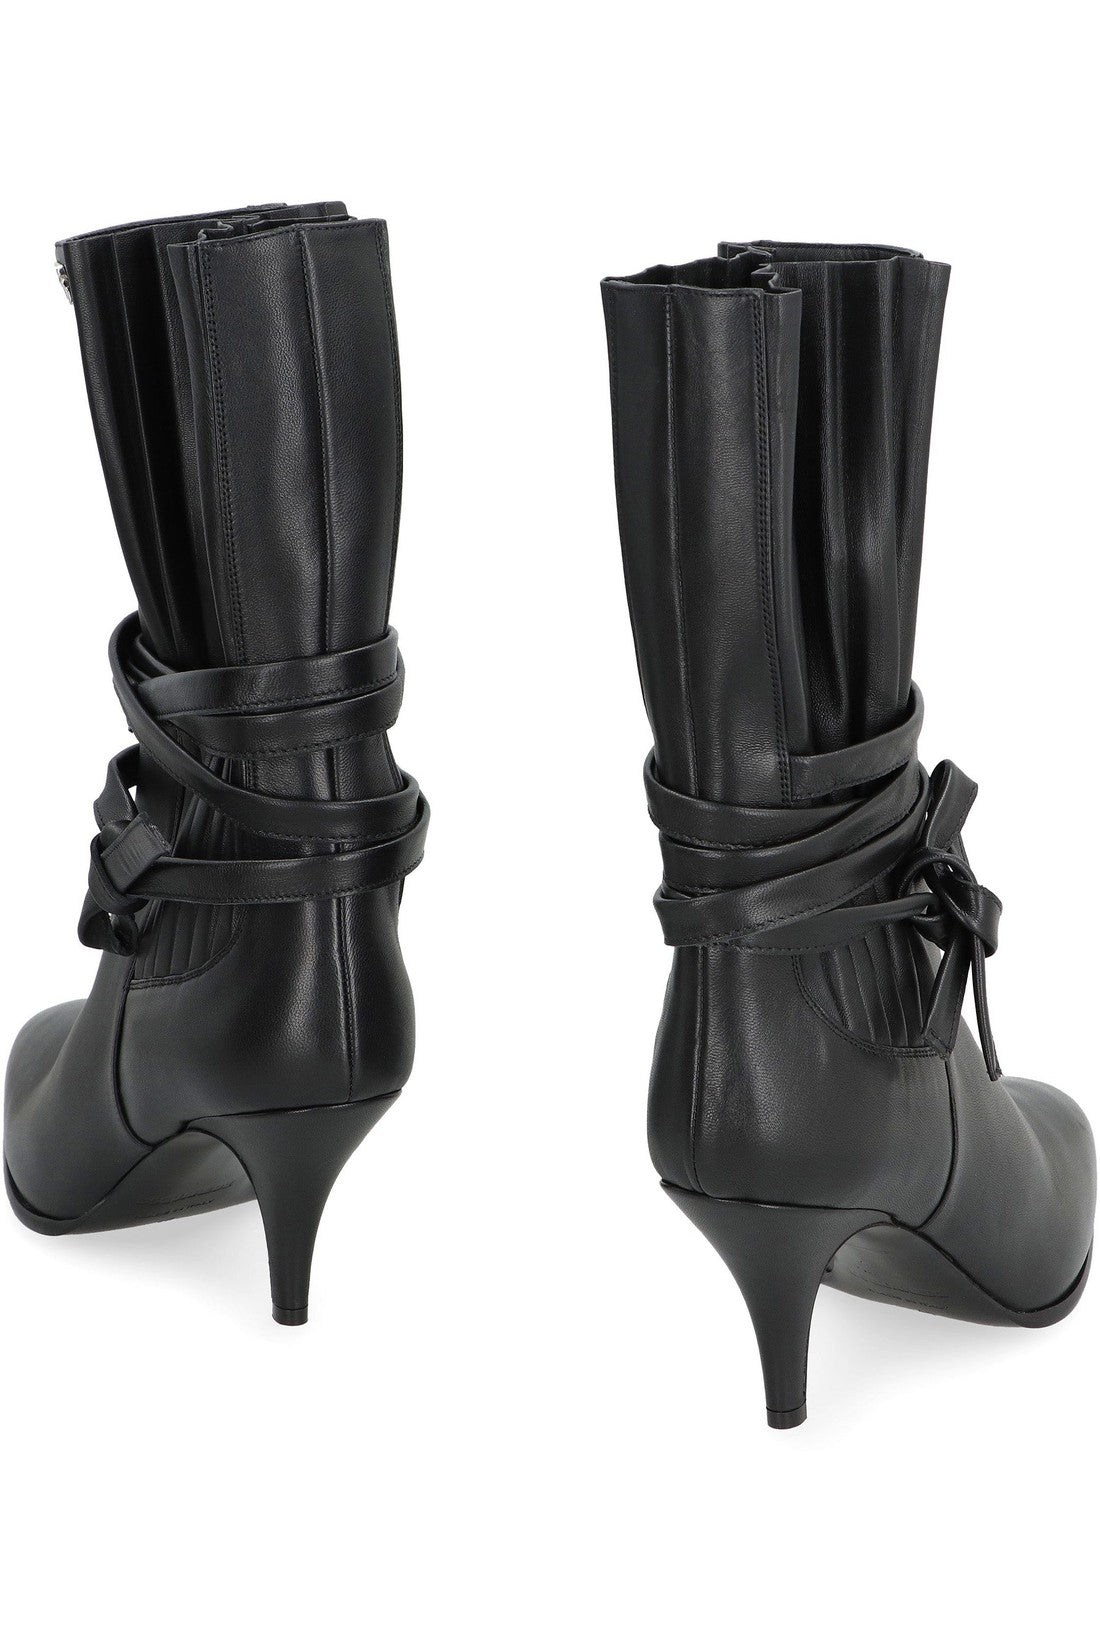 Dsquared2-OUTLET-SALE-Leather ankle boots-ARCHIVIST